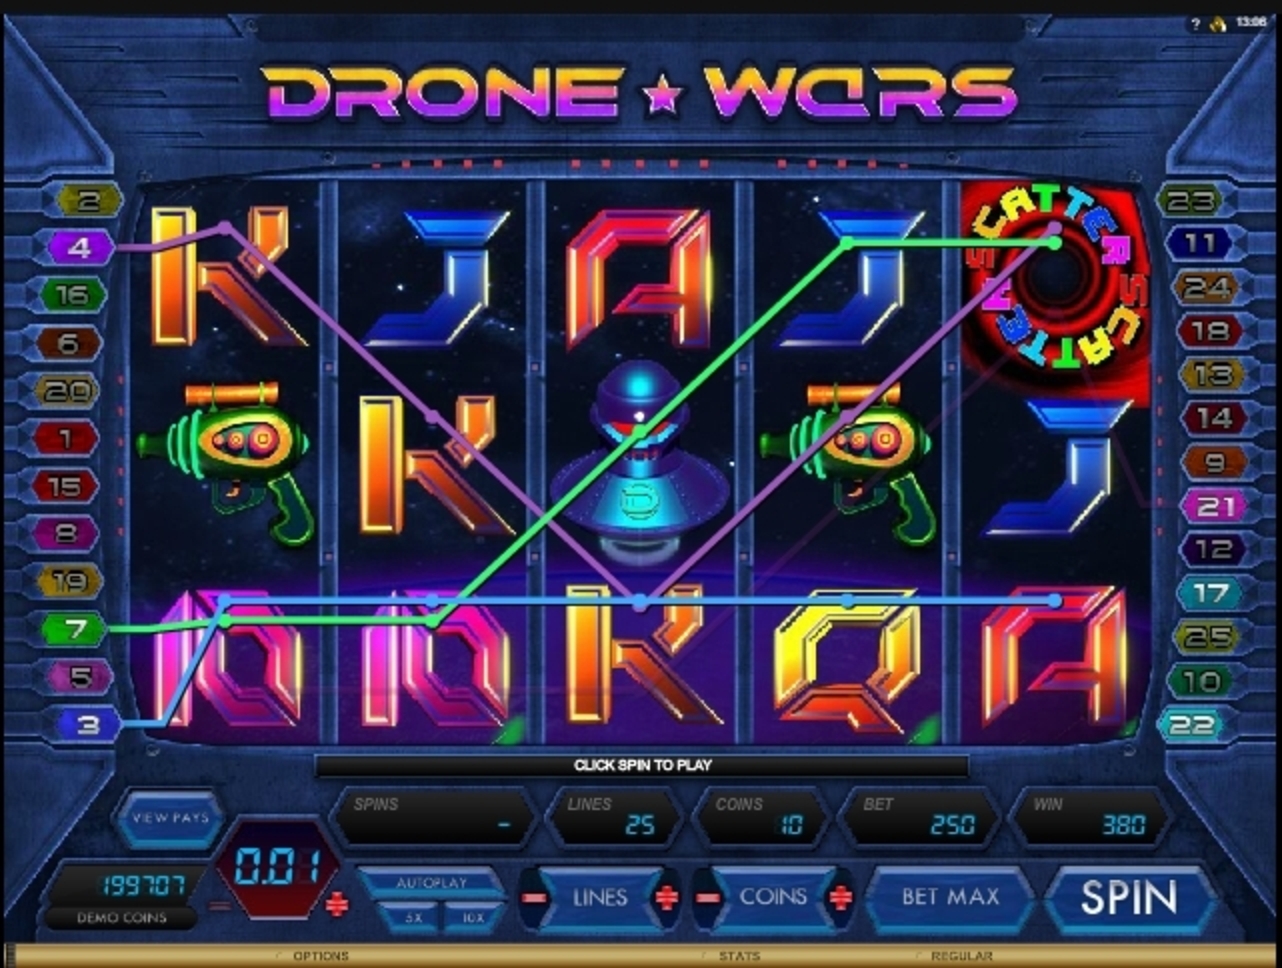 Win Money in Drone Wars Free Slot Game by Microgaming